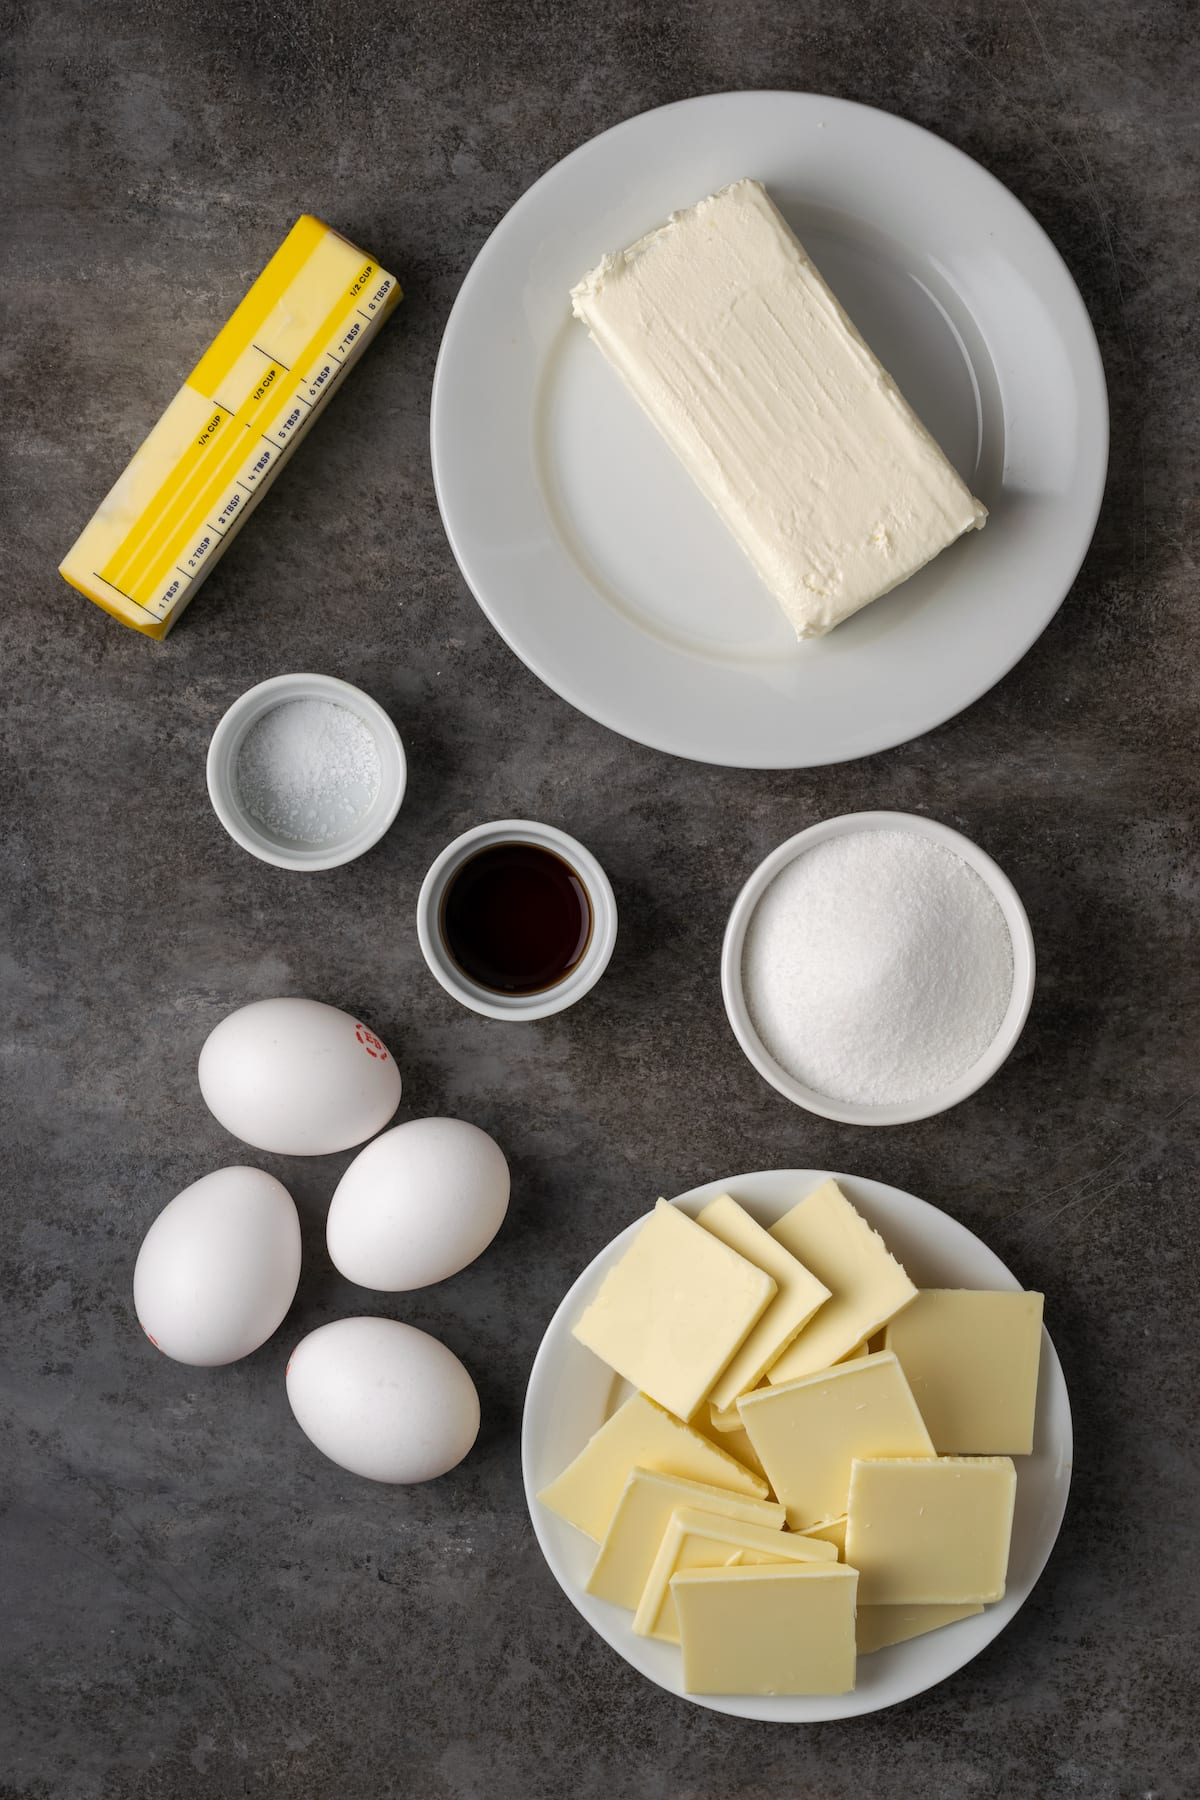 The ingredients for flourless white chocolate cake.